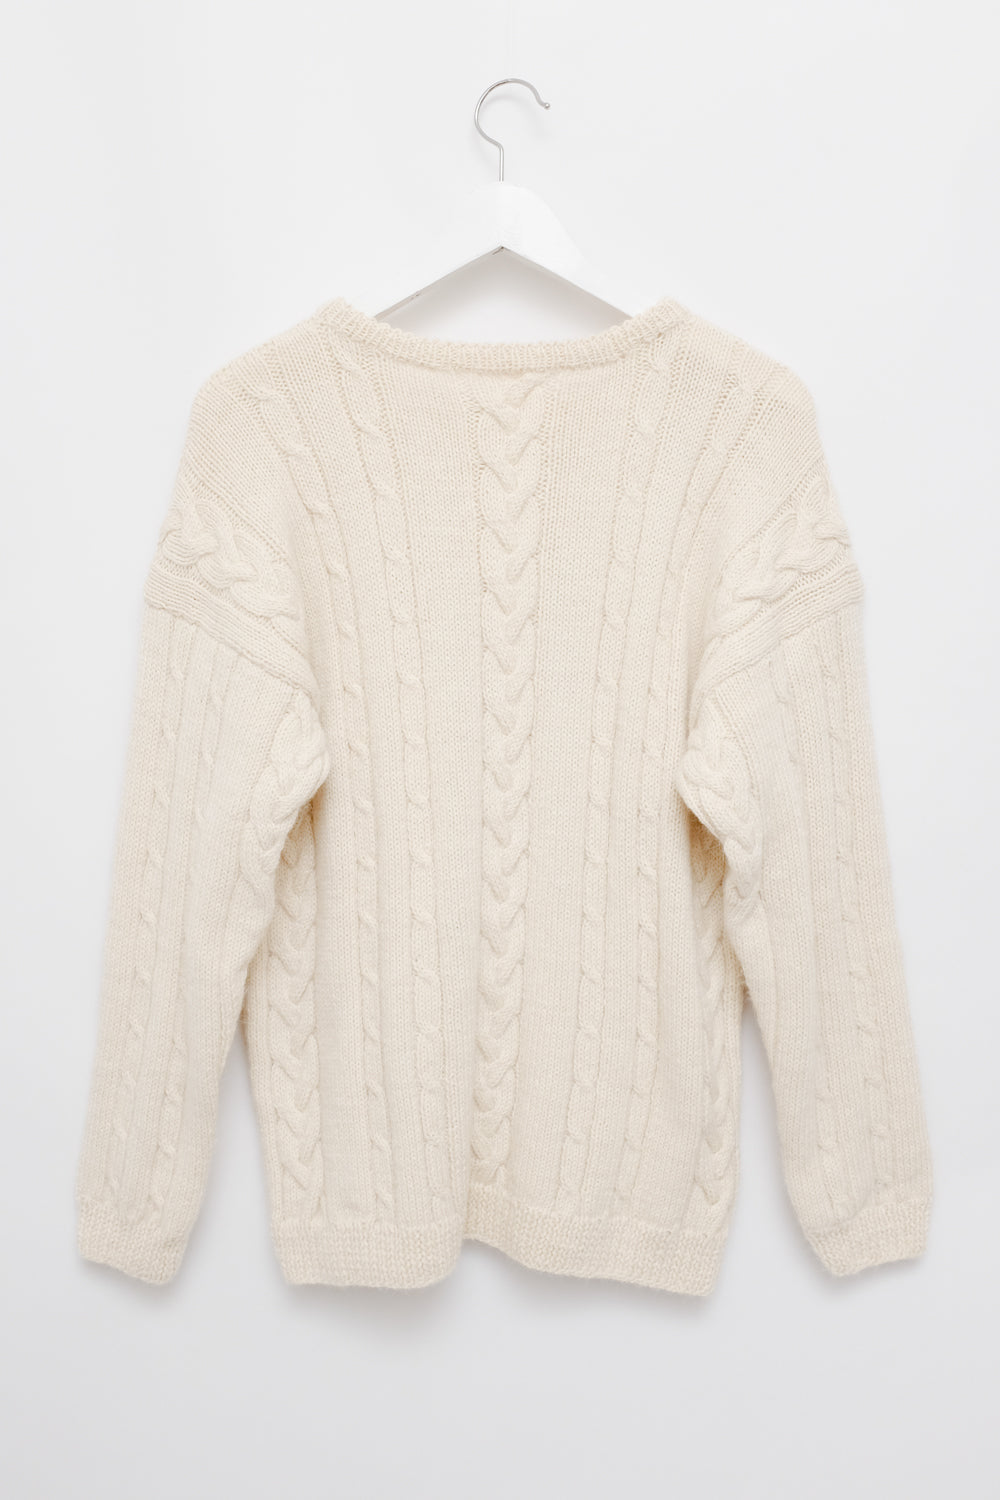 HANDMADE CABLE KNIT WOOL VINTAGE SWEATER